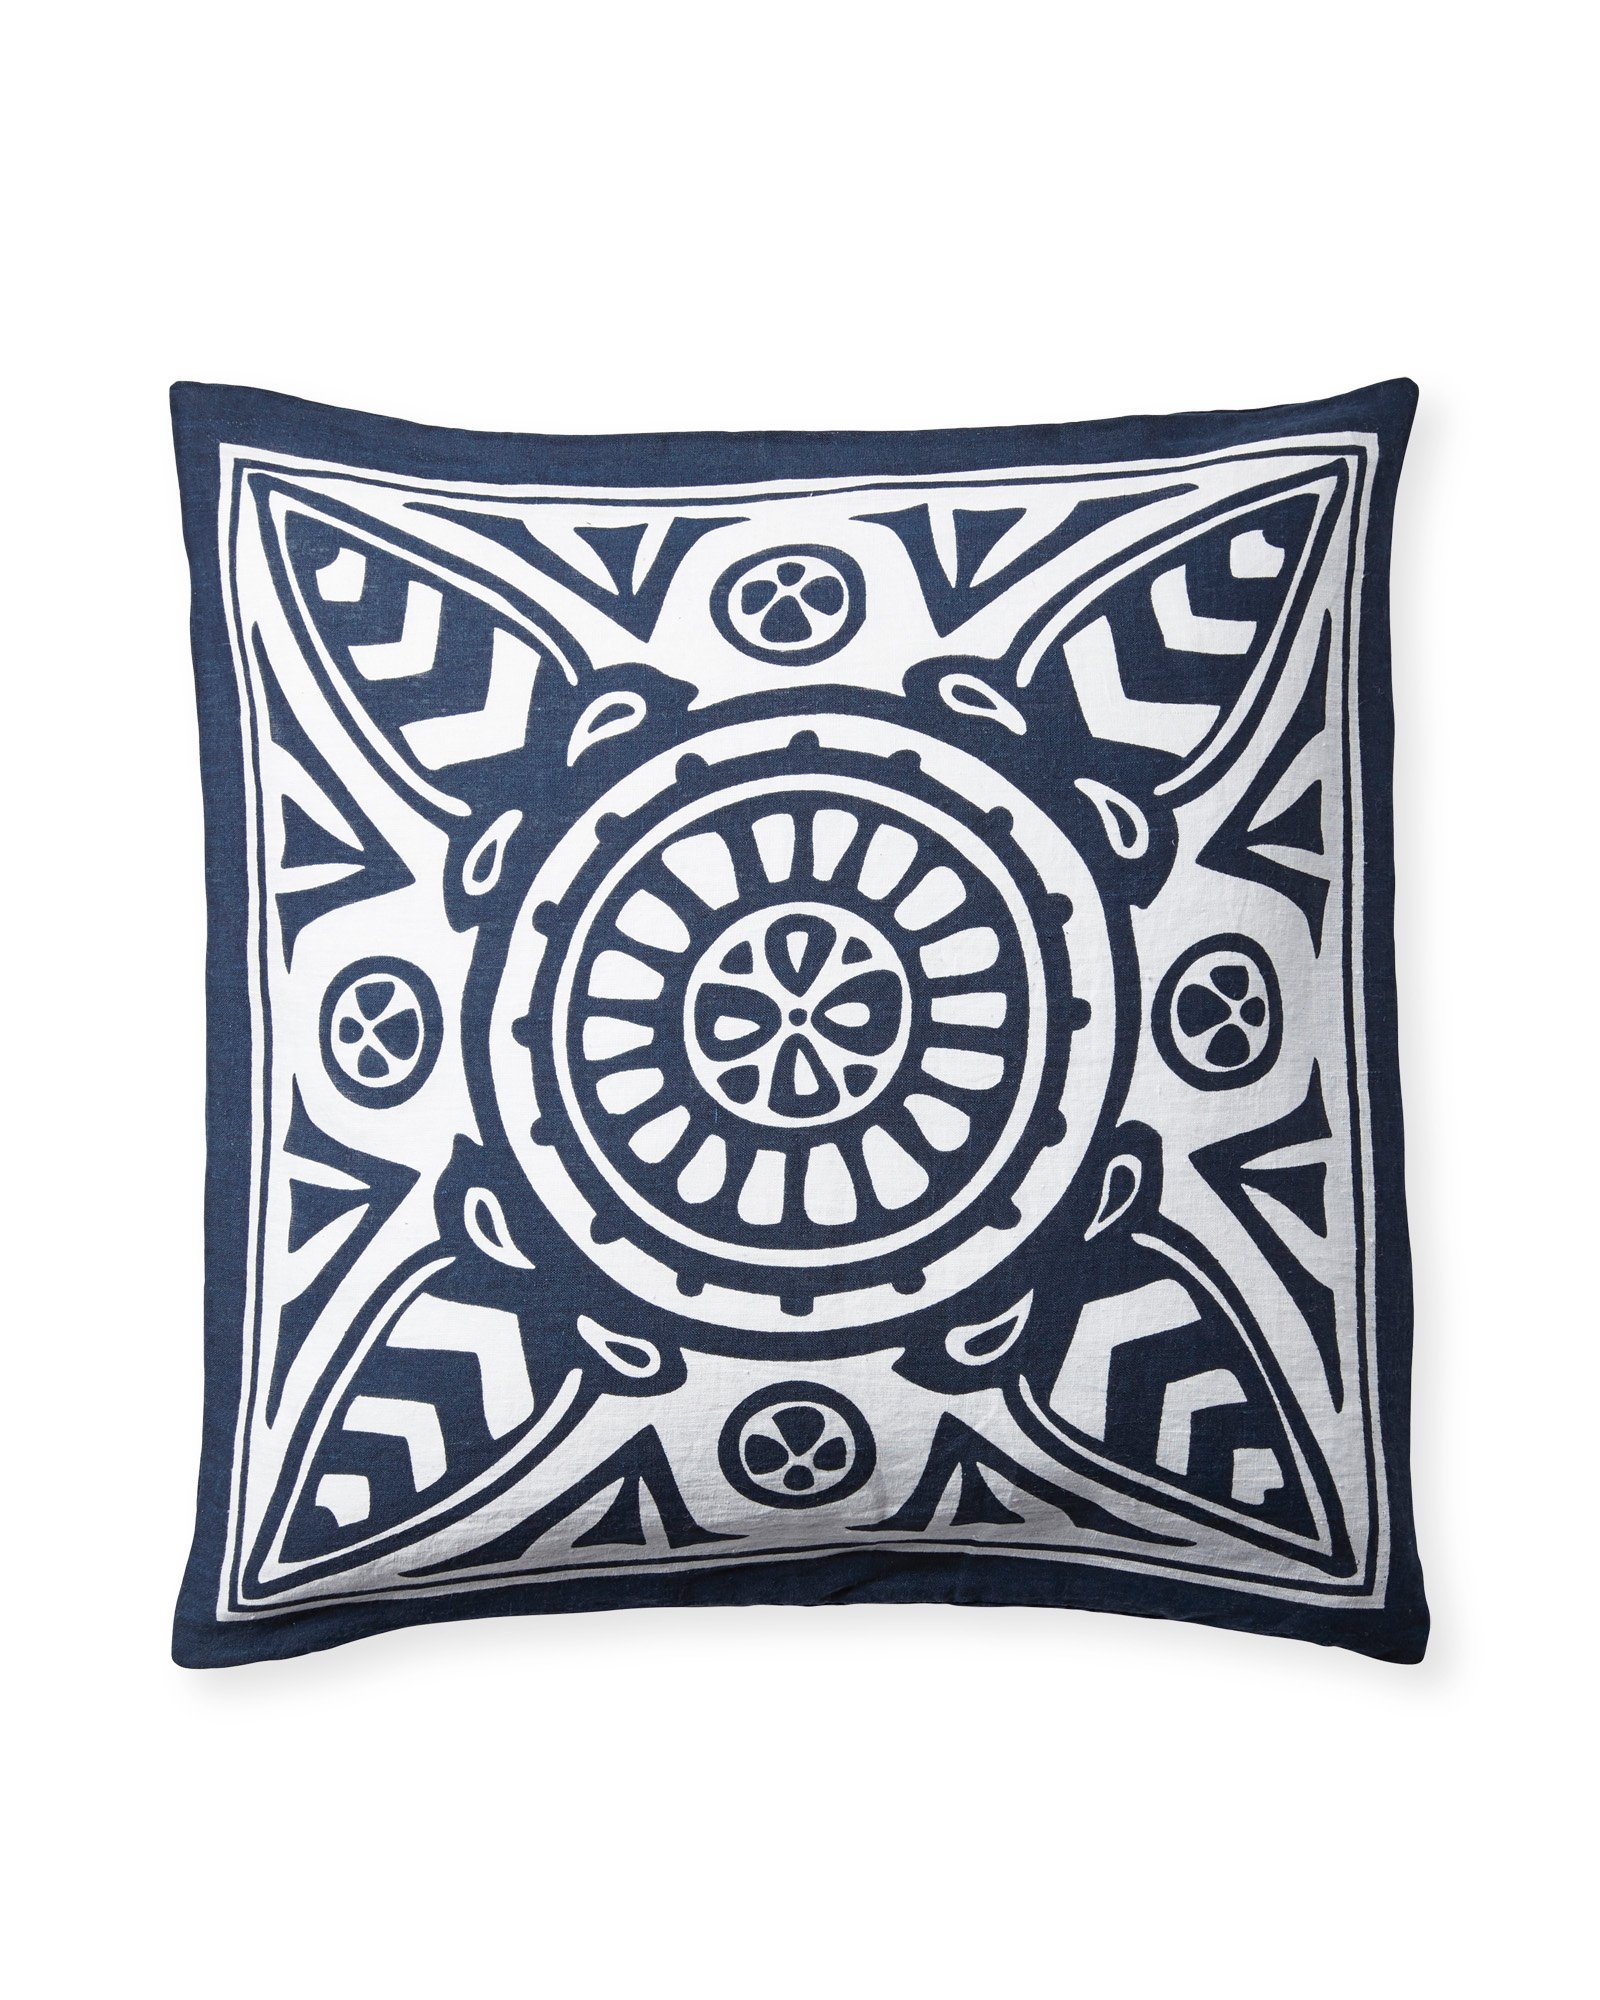 Medallion Metallic Pillow Cover - Navy-20''x 20''. - insert not included - Image 0